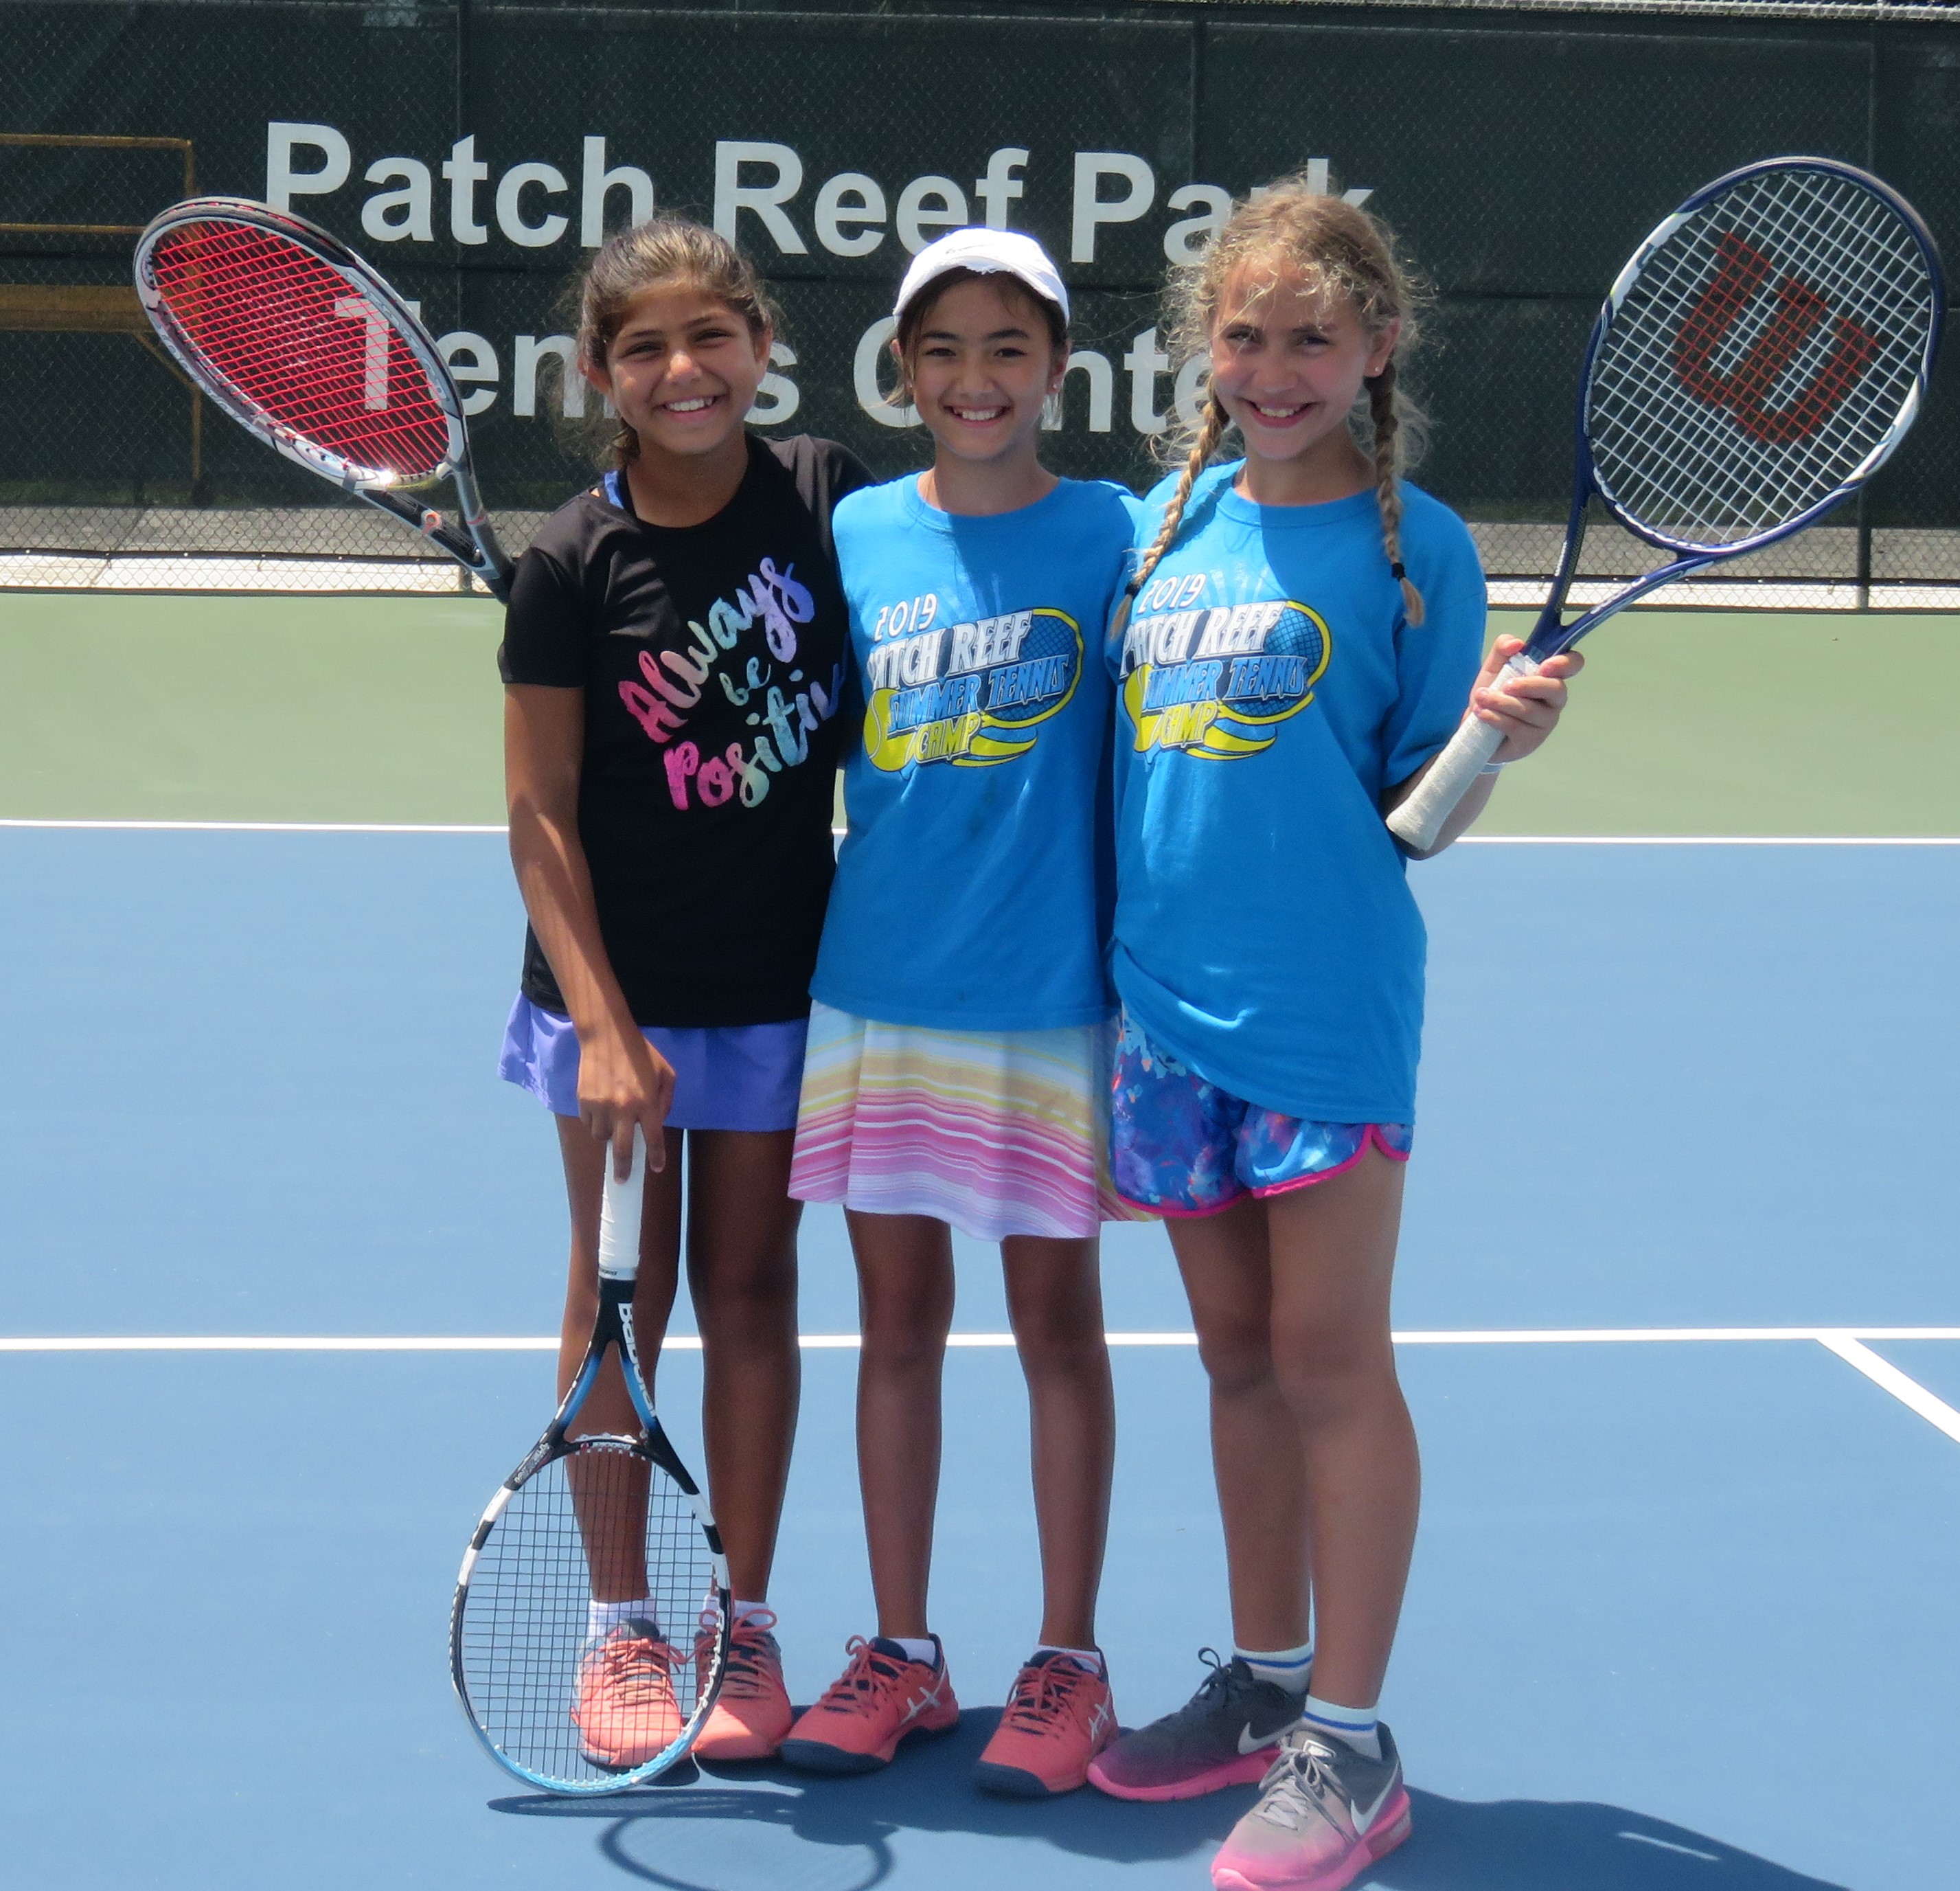 Three girls with tennis racquets smiling